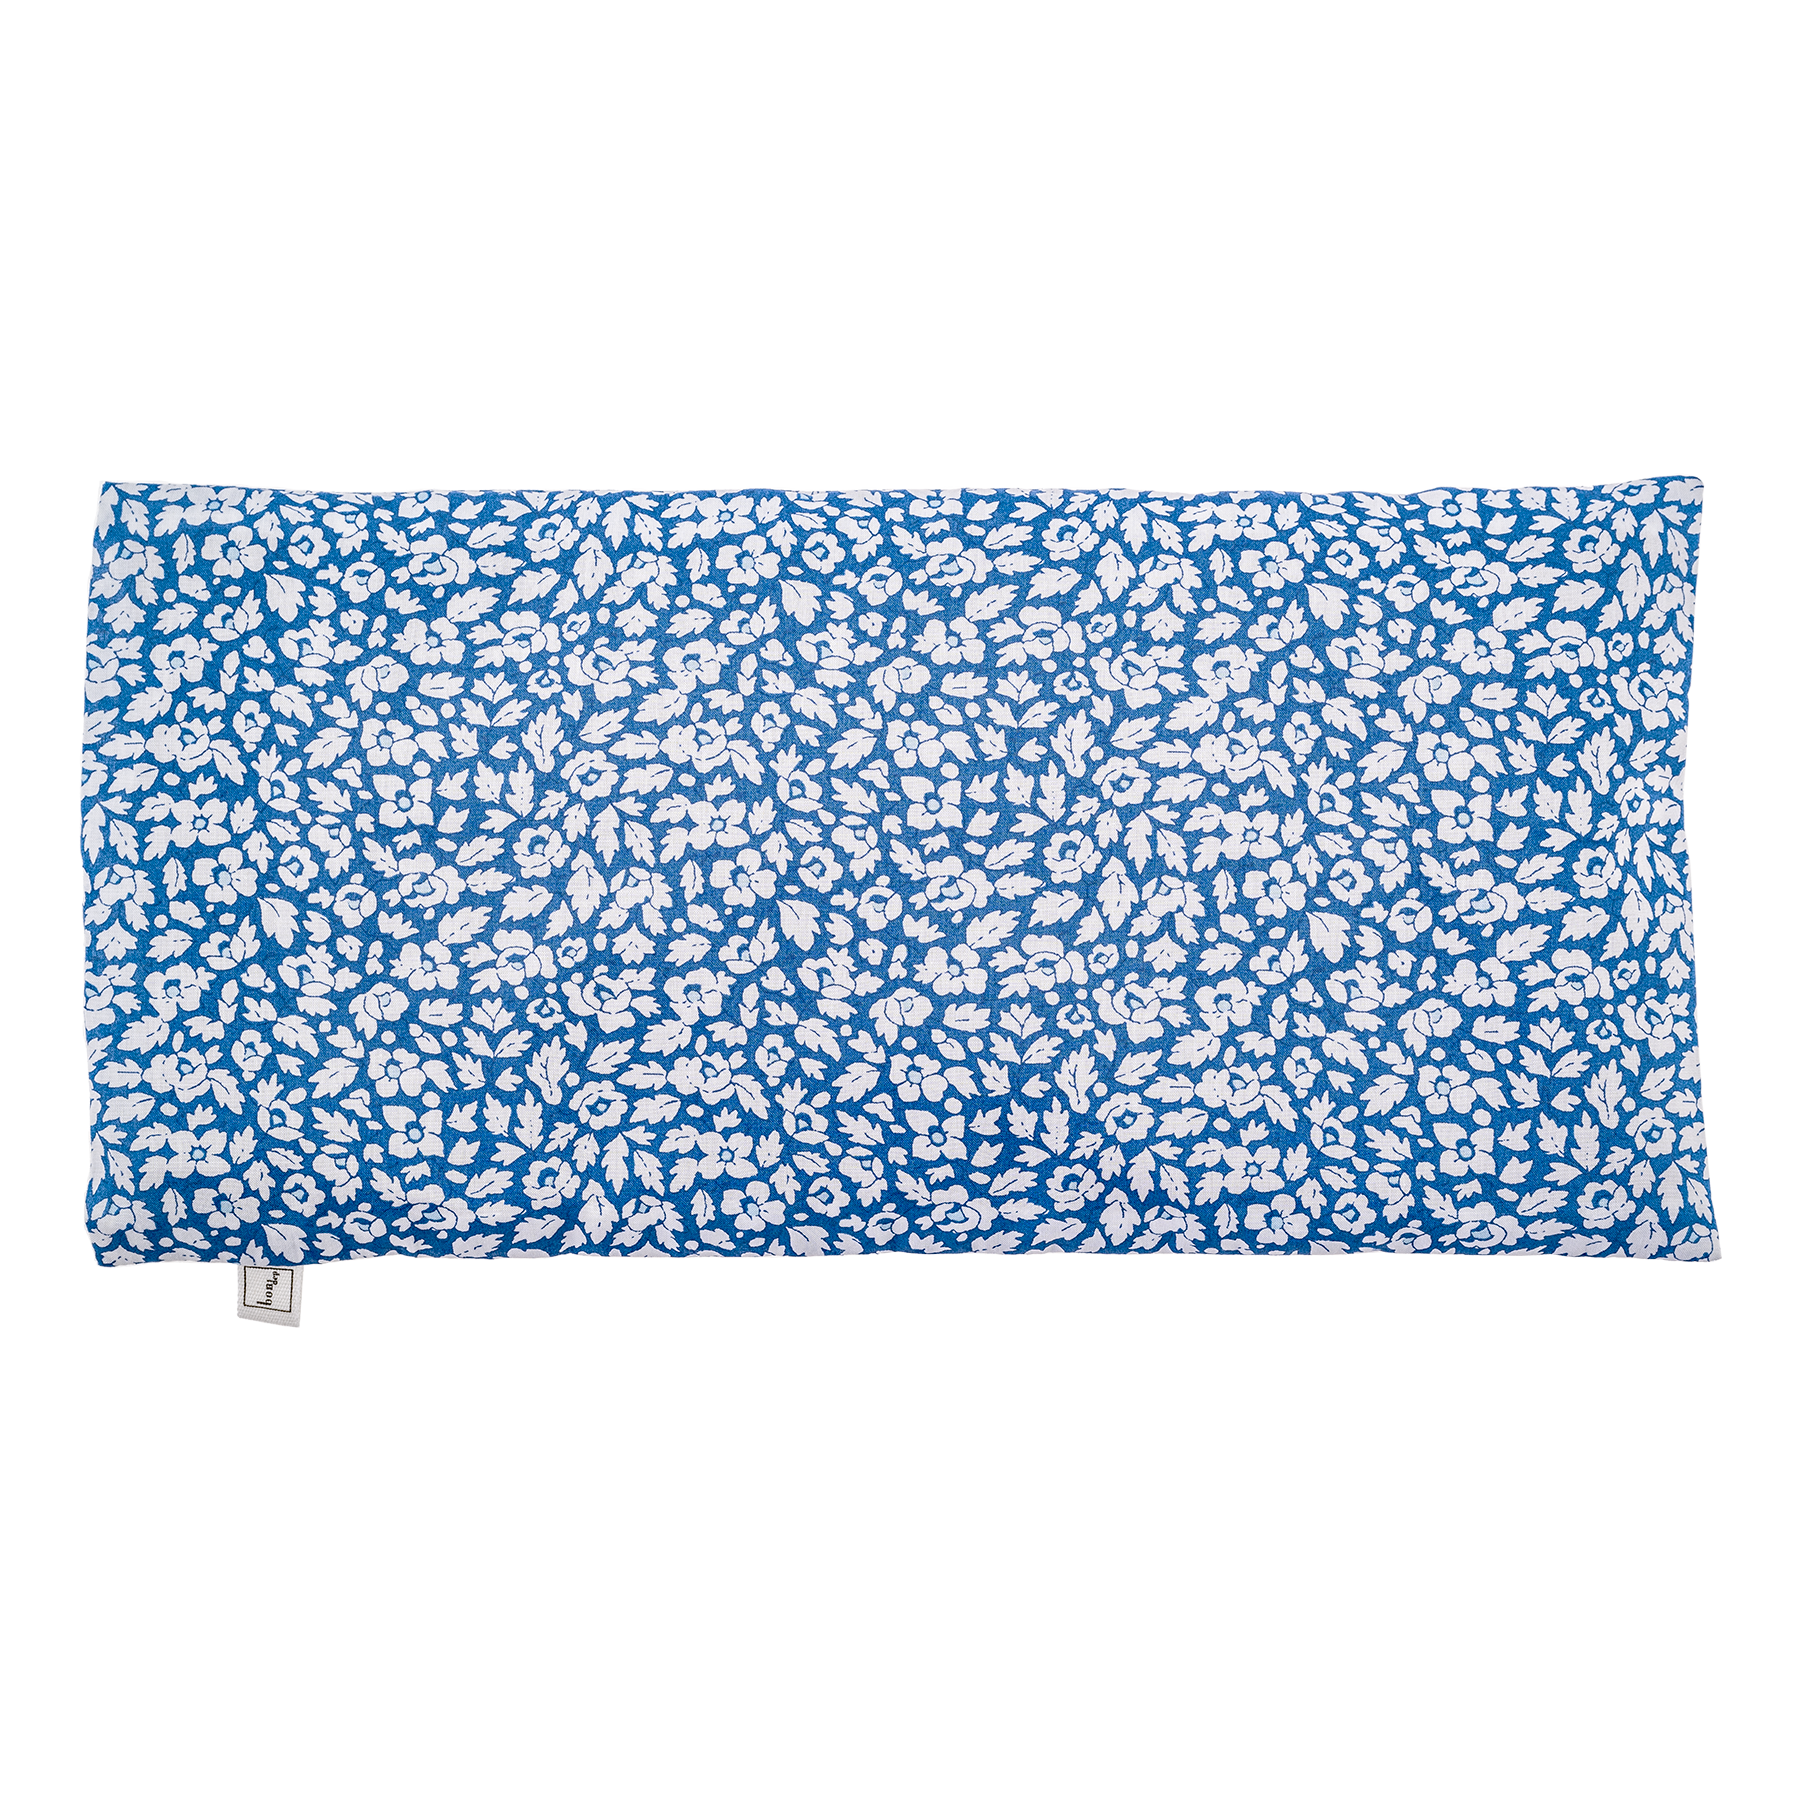 Image of Relaxing Eyepillow made with Liberty Feather Blue from Bon Dep Essentials